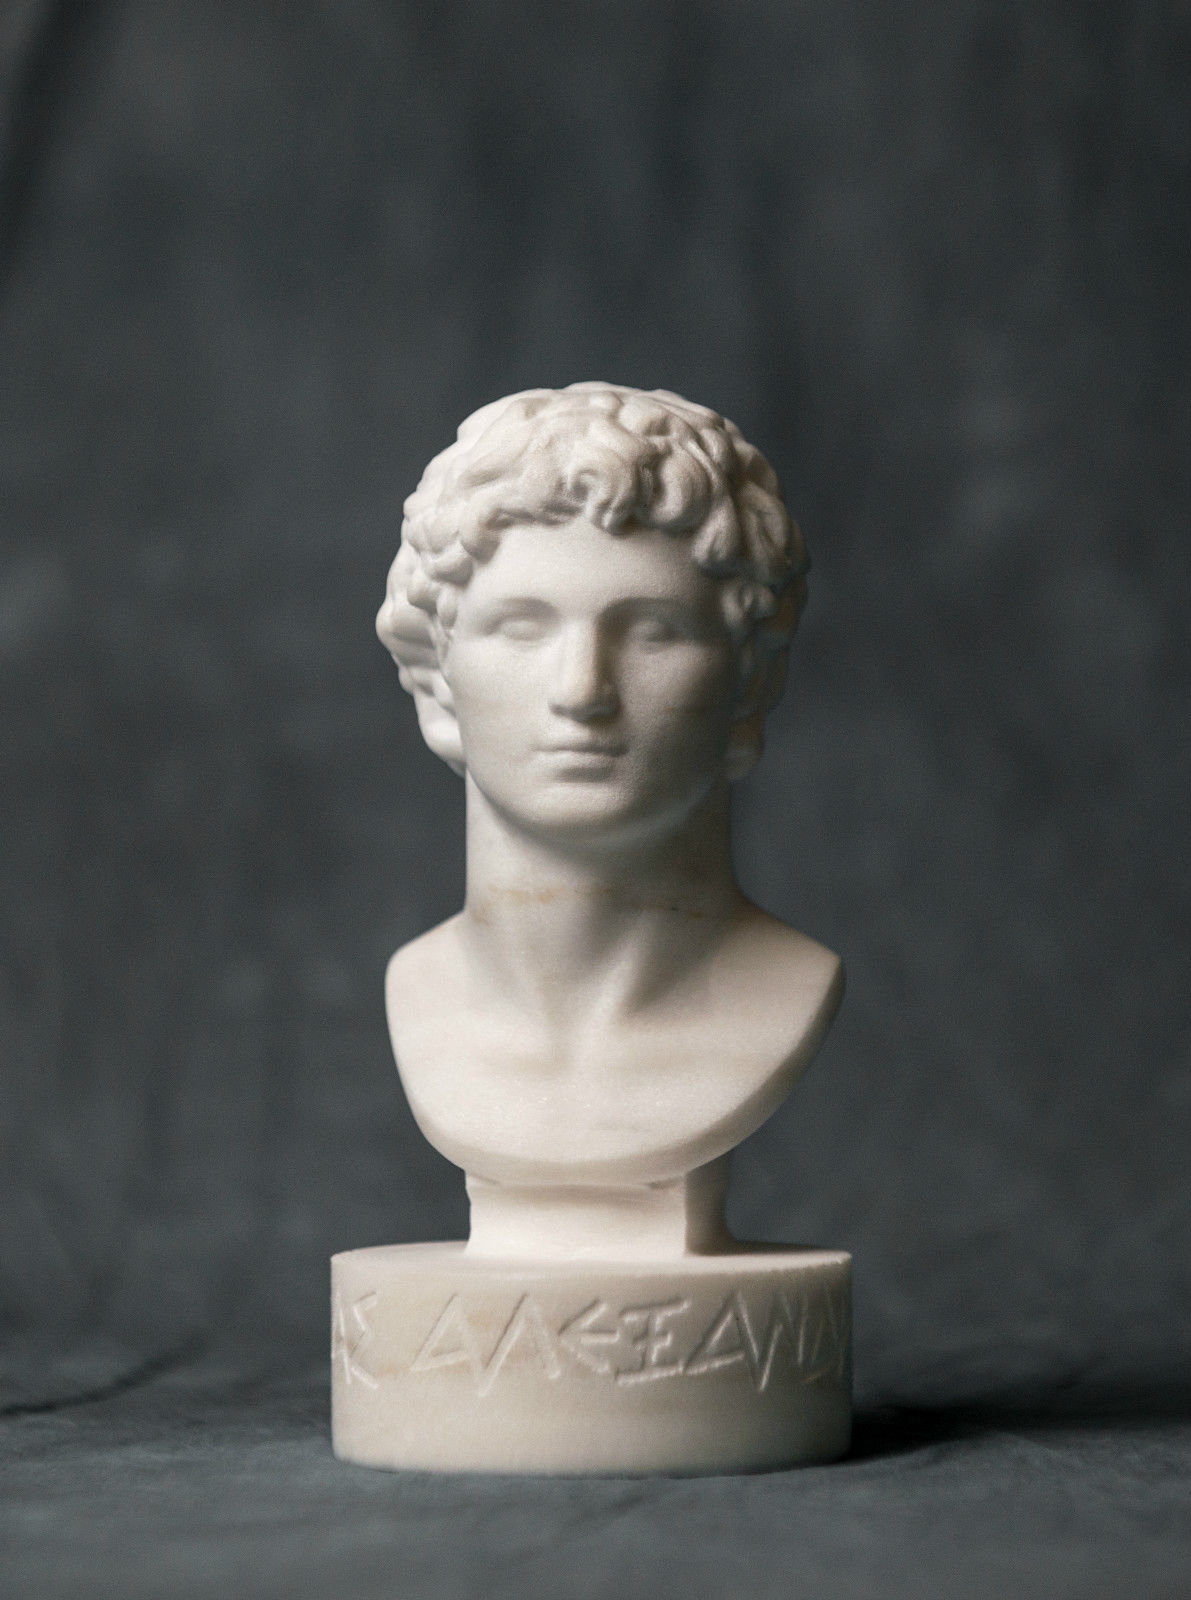 MARBLE bust of Alexander the great statue carved Greek marble figurine sculpture